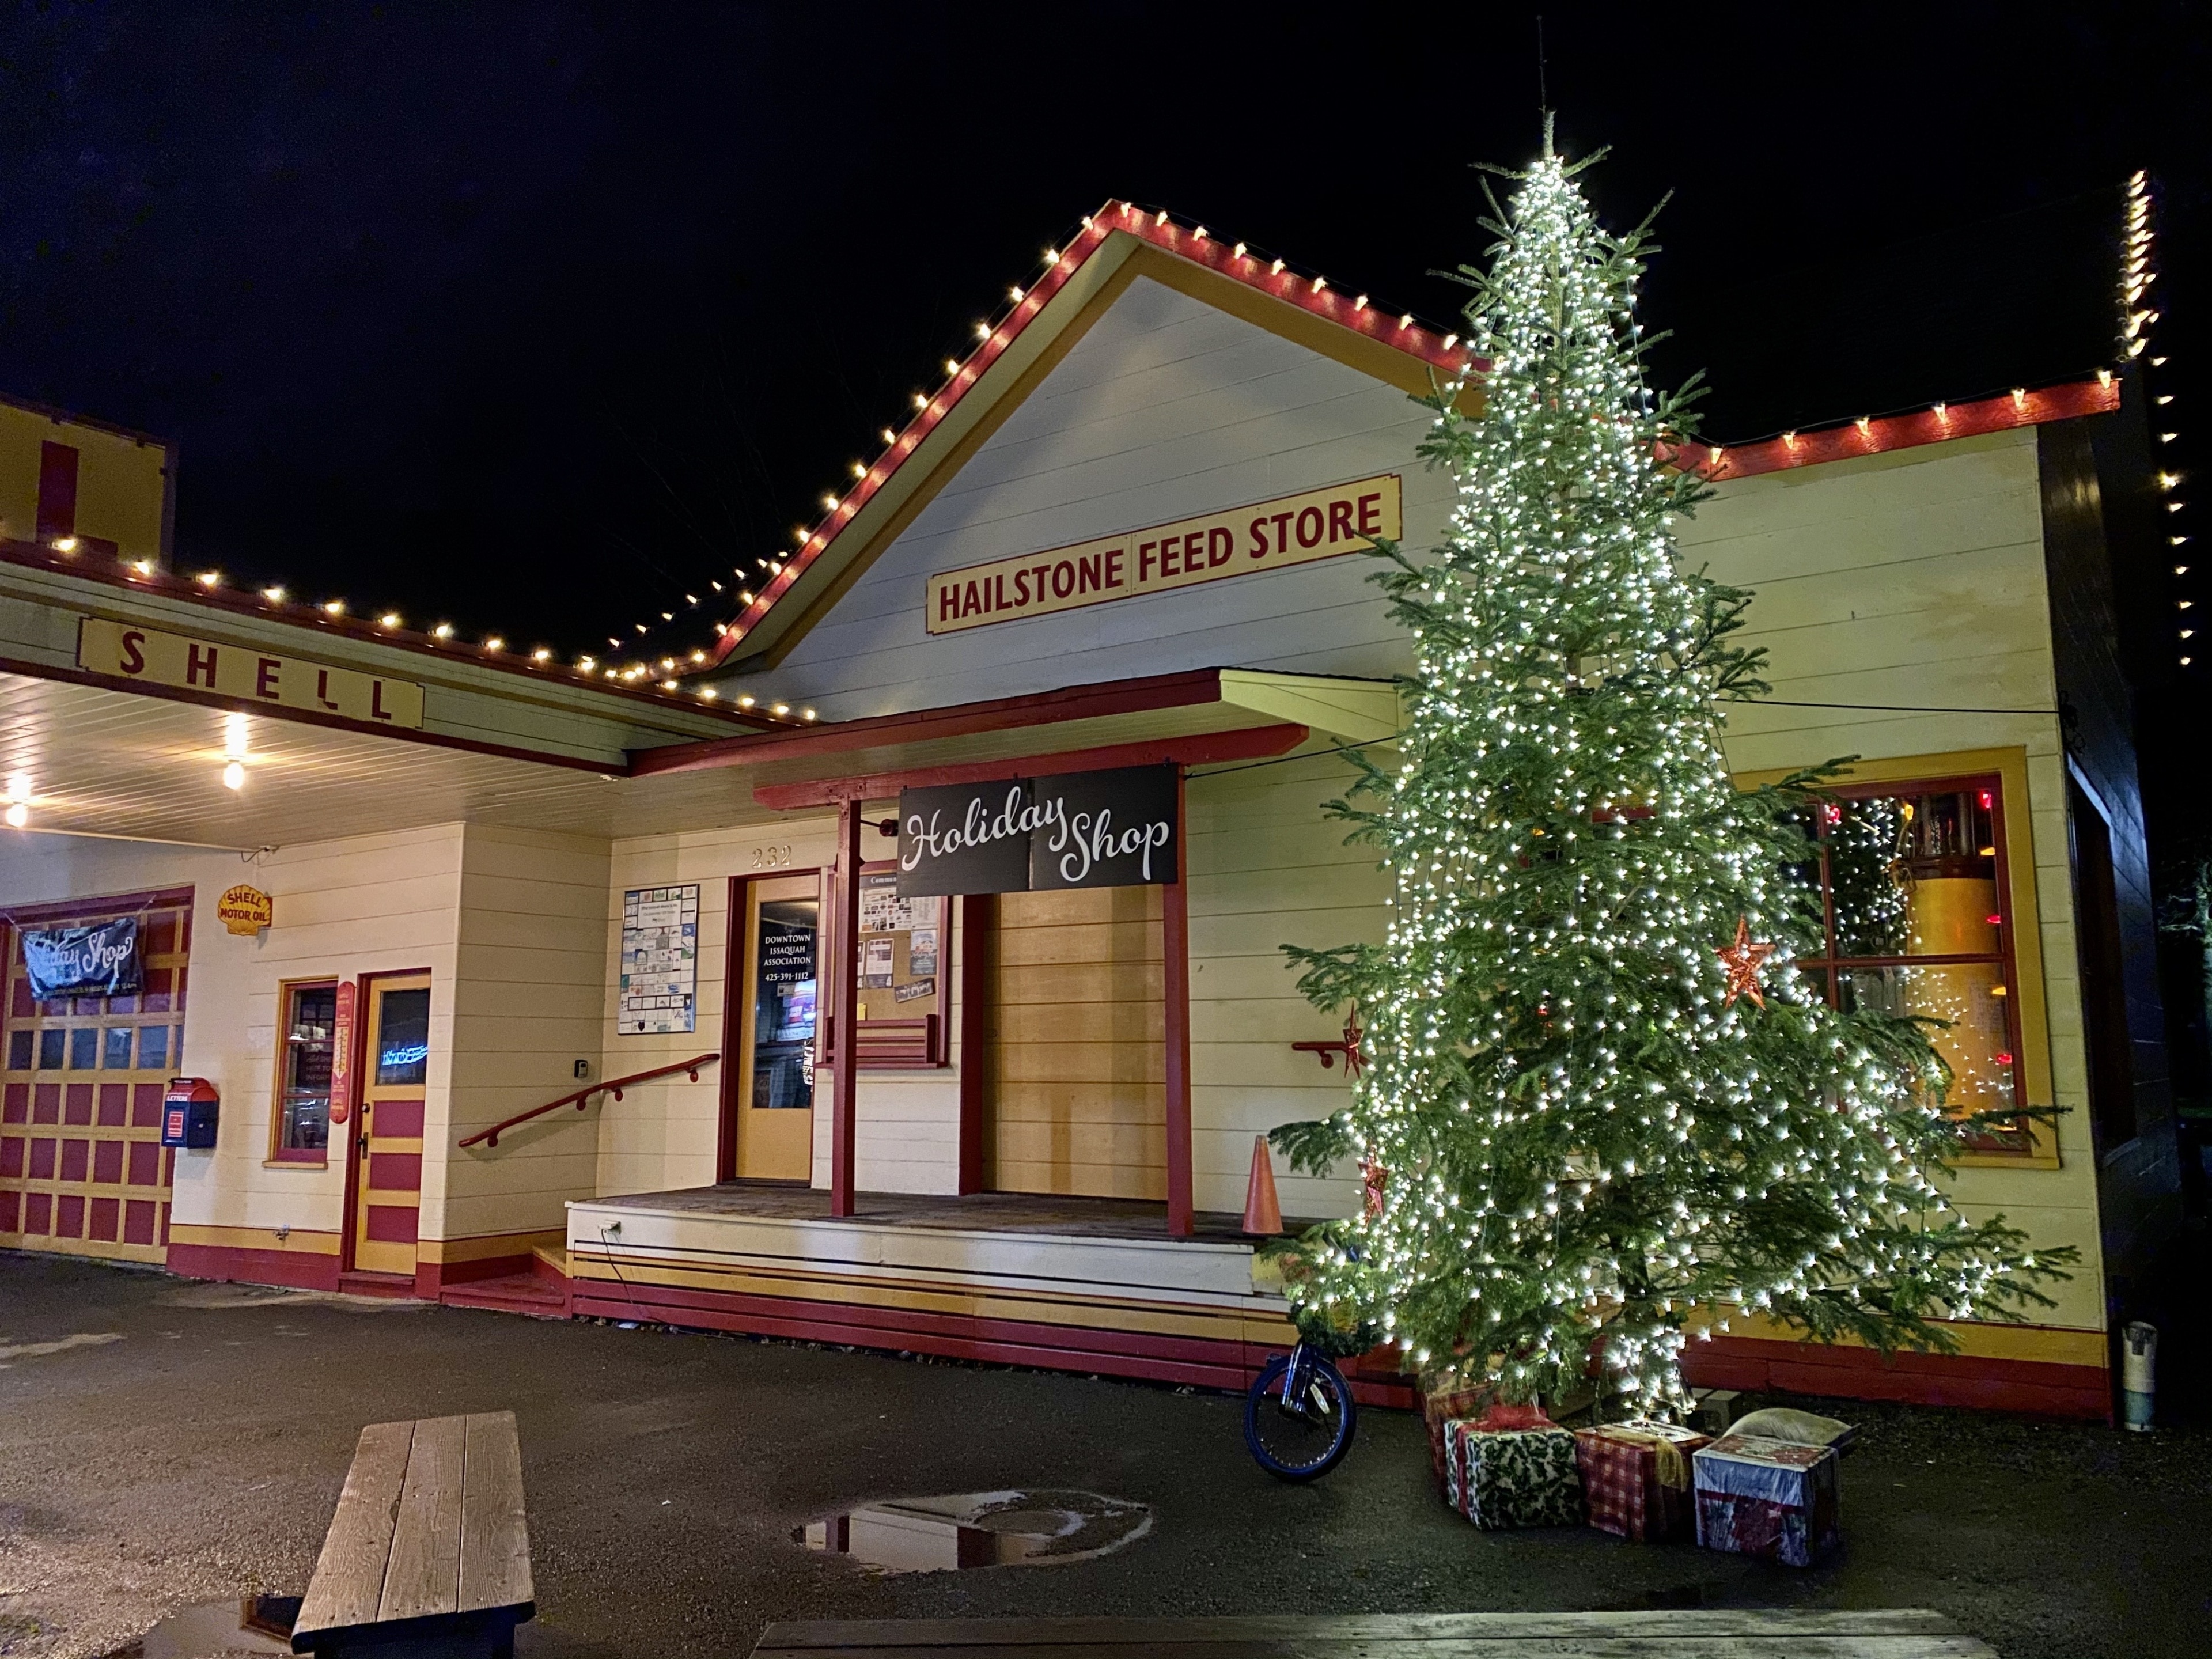 I love that this old fuel station is so many different things now. Earlier this evening it was a gift shop and the location of a mini Christmas music show. Last summer it was the place to get tasting tokens for the art & wine walk.